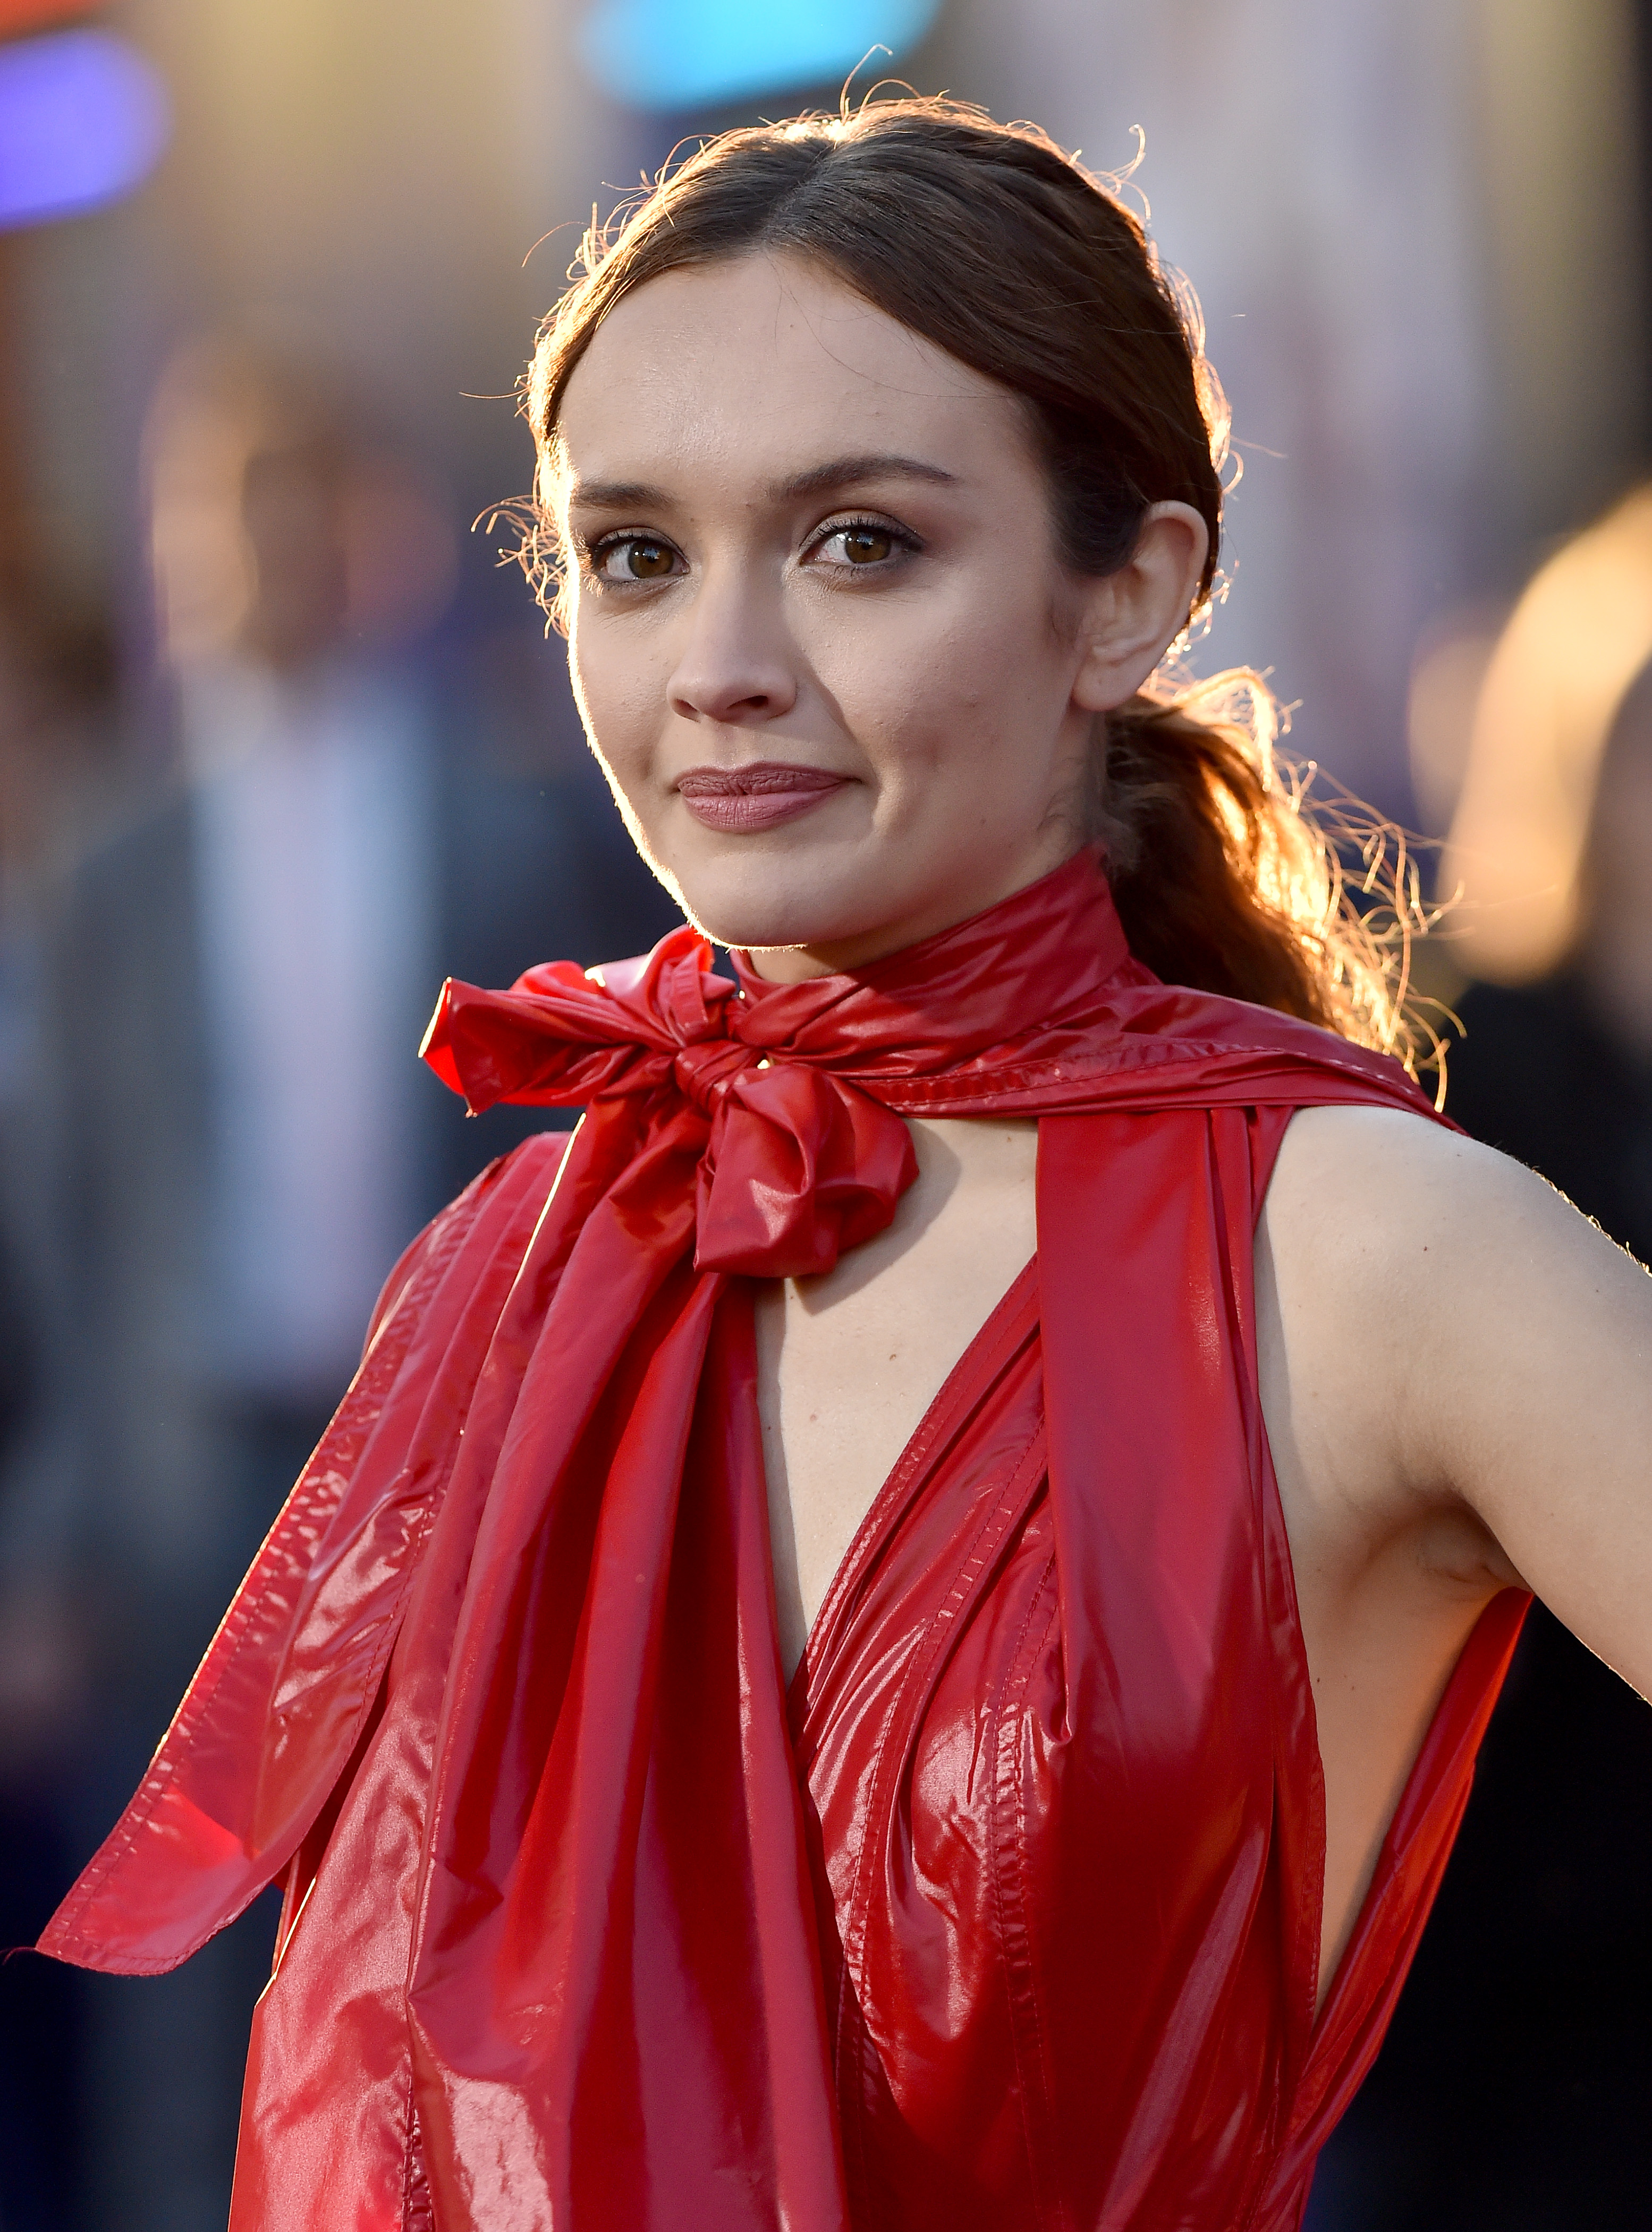 Actress Olivia Cooke arrives at the Premiere of Warner Bros. Pictures' 'Ready Player One' at Dolby Theatre on March 26, 2018 in Hollywood, California. 